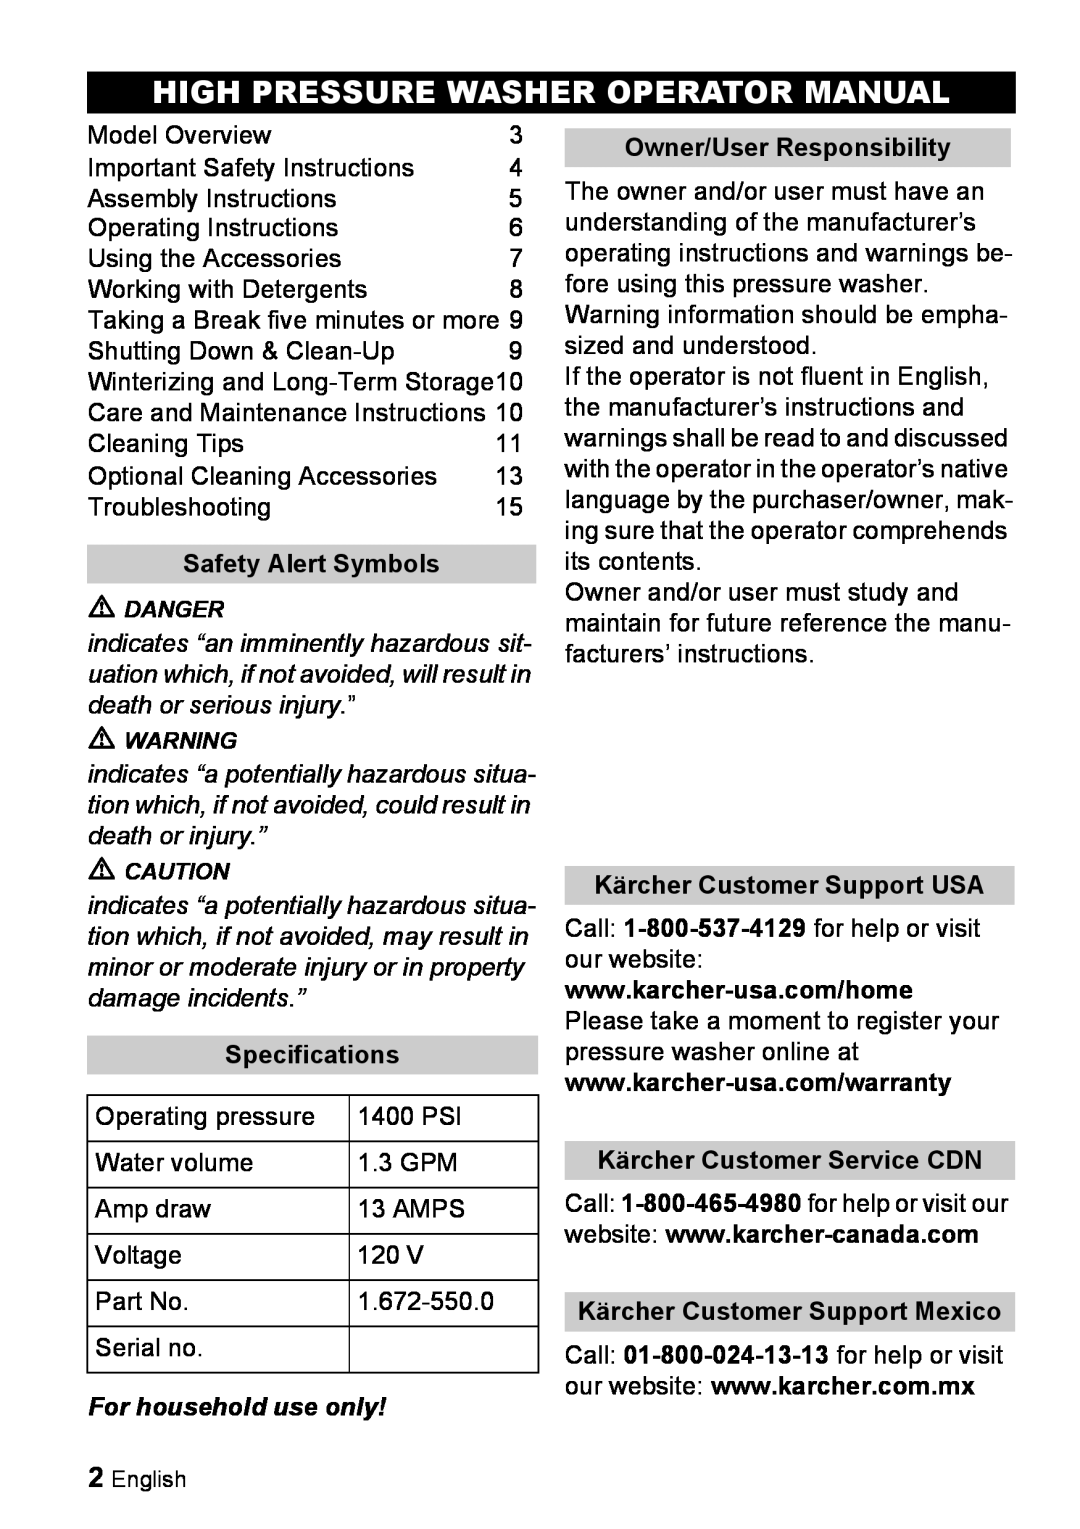 Karcher K 2.16 manual High Pressure Washer Operator Manual, Safety Alert Symbols, Specifications, For household use only 